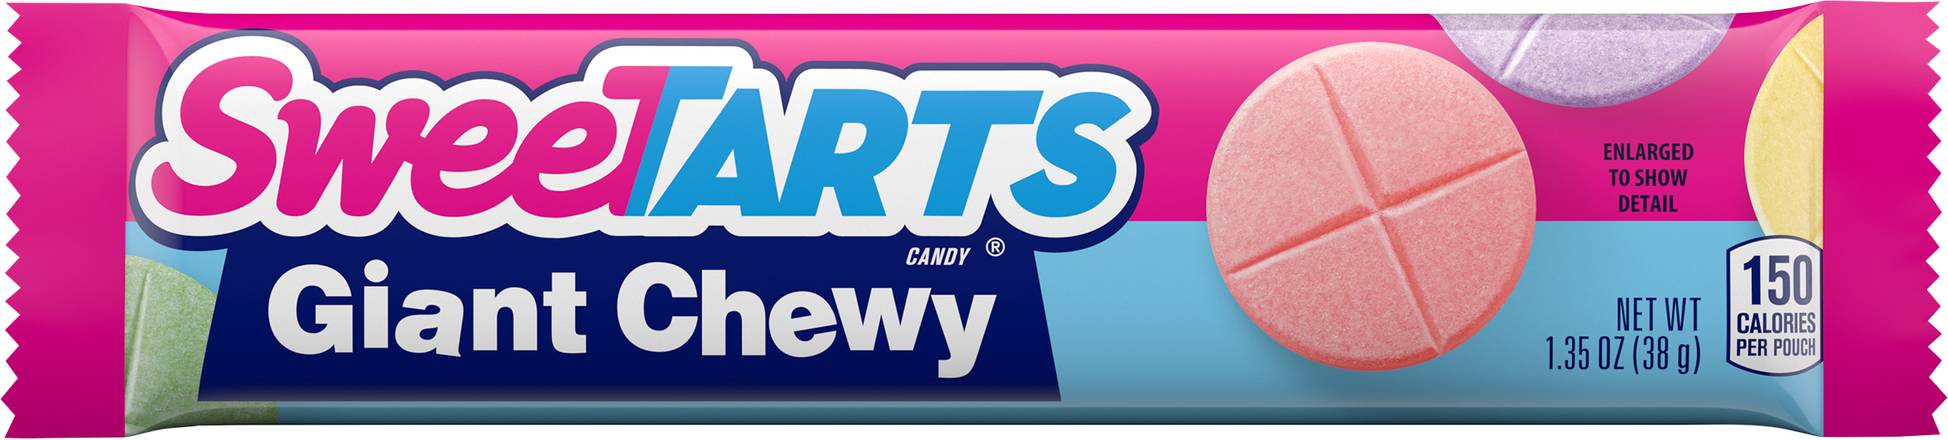 Sweetarts Giant Chewy Candy (assorted)